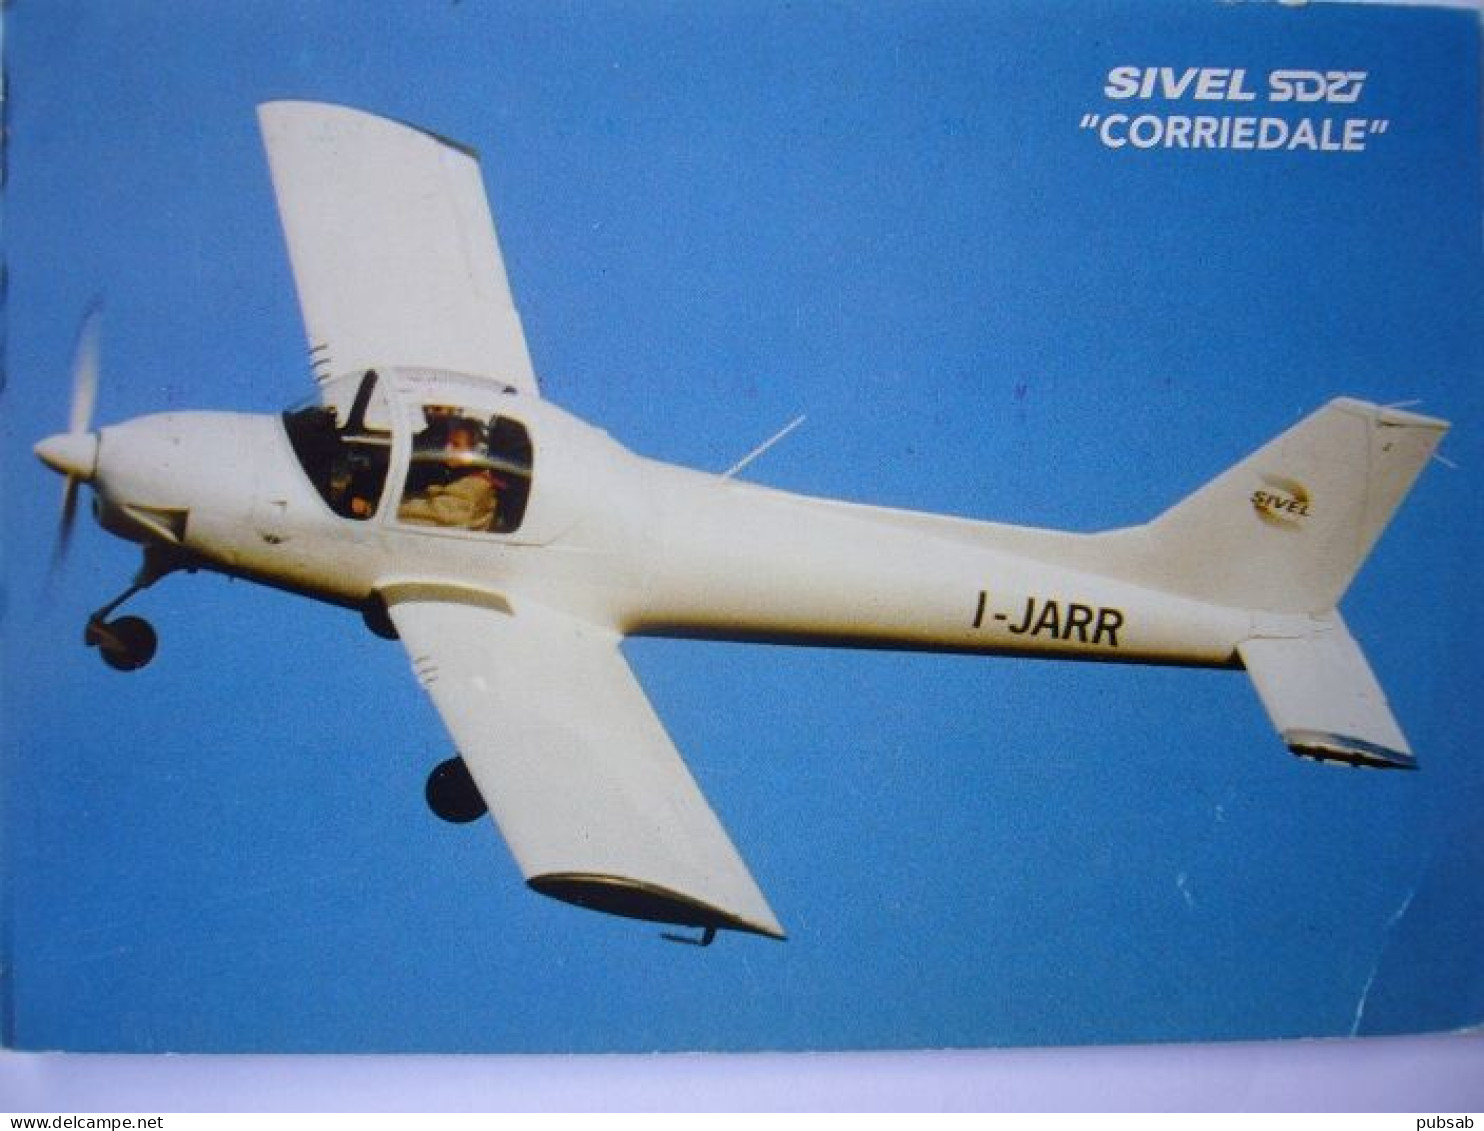 Avion / Airplane / SIVEL SD27 "CORRIEDALE" / Seen At Lodrino - 1946-....: Moderne